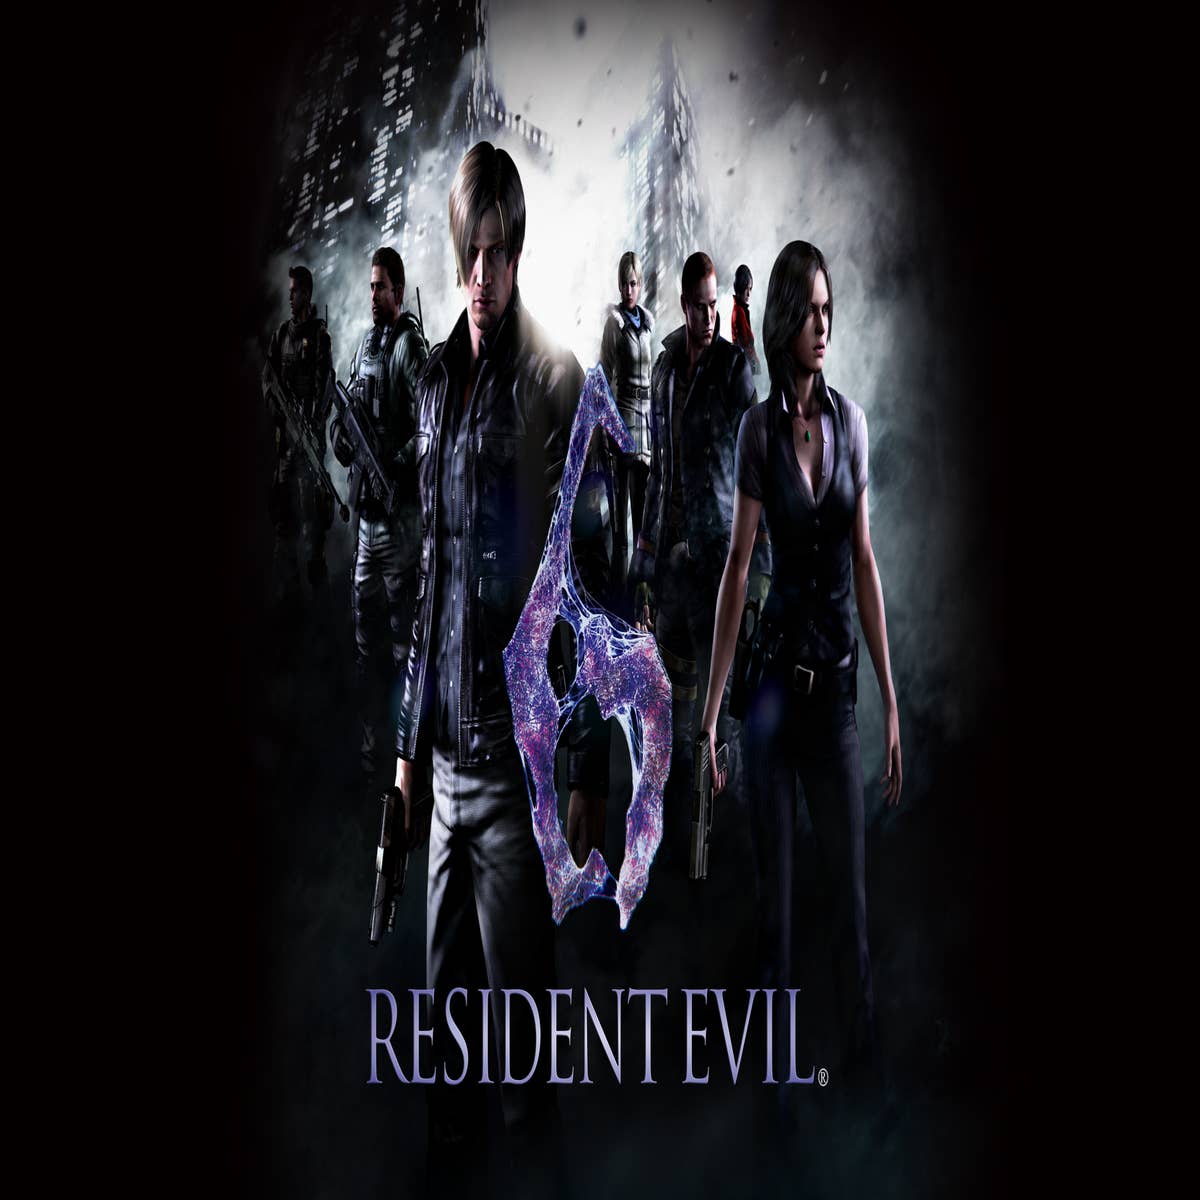 Resident Evil Village PC bug currently breaks the game on Steam